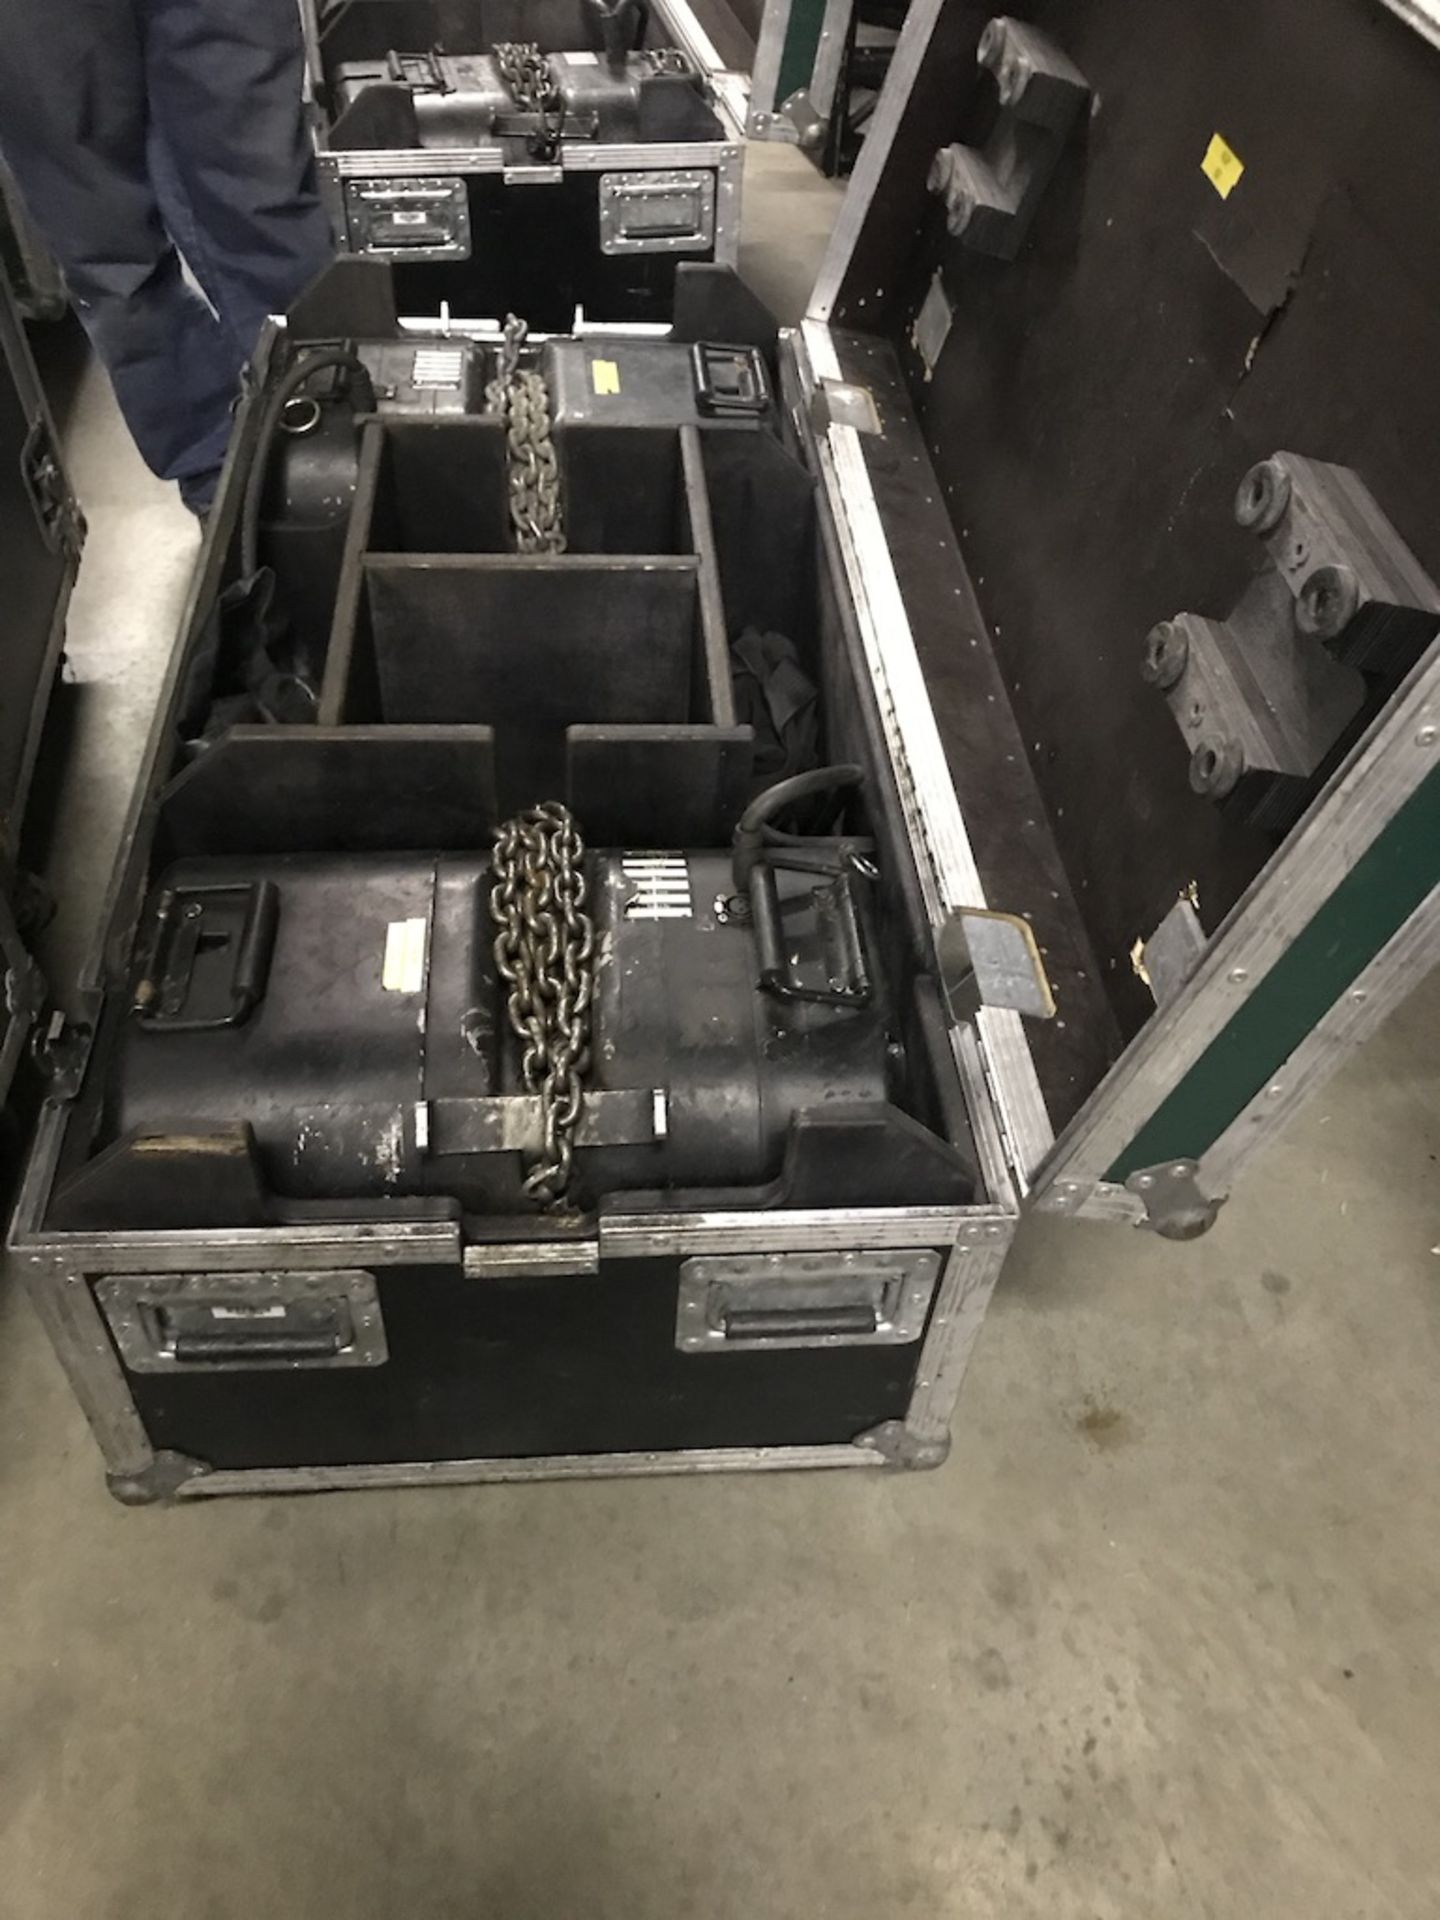 LOT OF: (2) ATLANTA RIGGING SYSTEMS LODESTAR ELECTRIC CHAIN HOISTS RATED FOR 1 TON, BOTH HAVE 60' FE